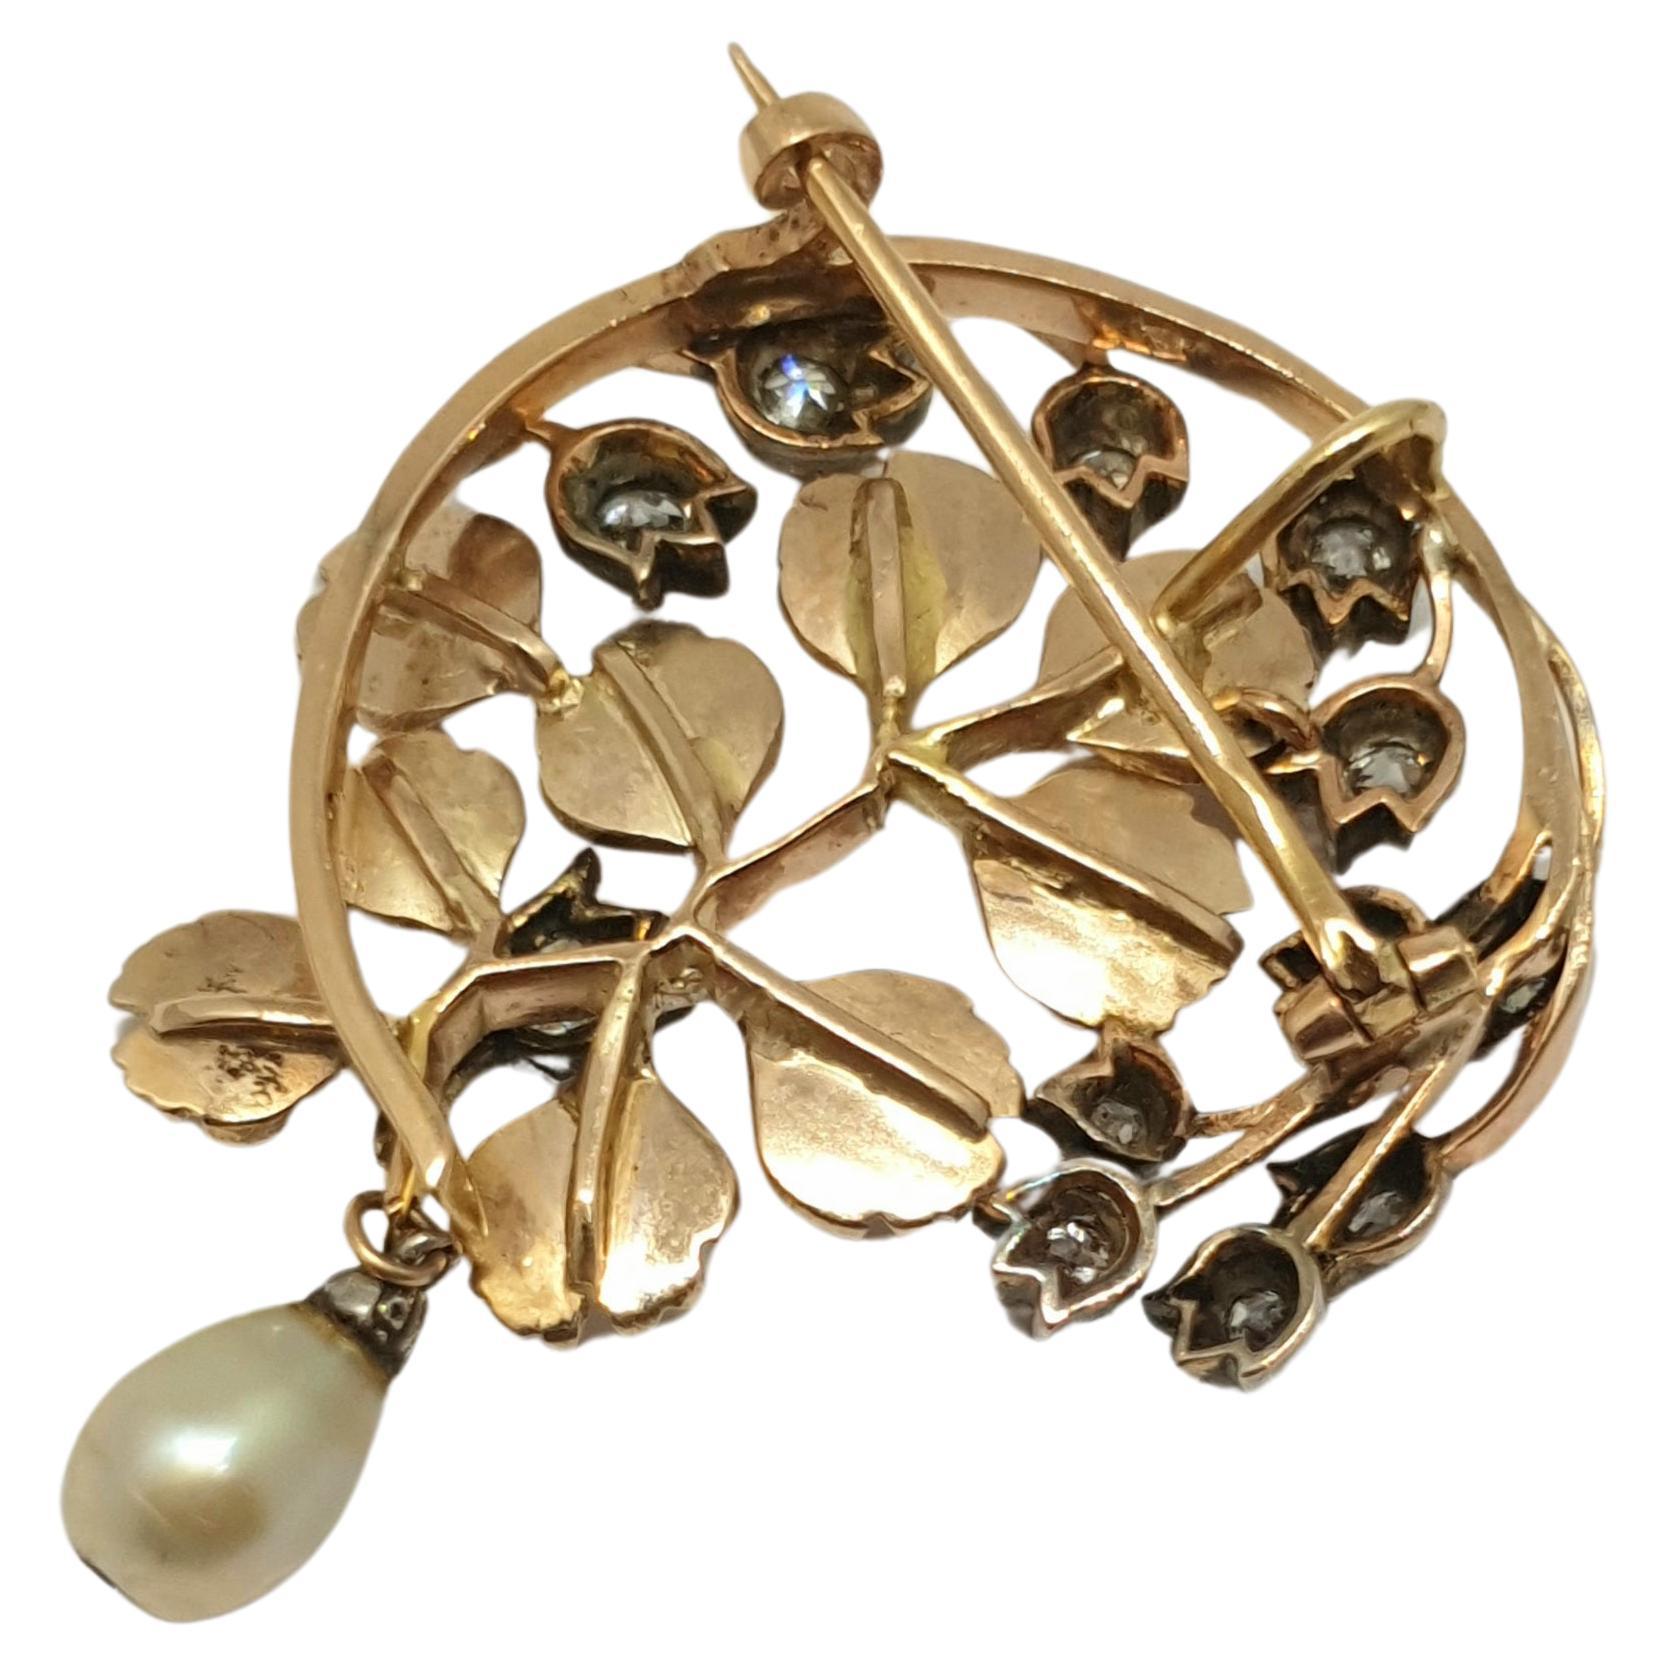 Antique French 1910s old mine cut diamond pendant and brooch in artnoveau leaf  design decorated with several old mine cut diamonds estimate of 1 carat with a dangling pearl and 18k gold  setting yellow mat colour total pendant length 4cm and total